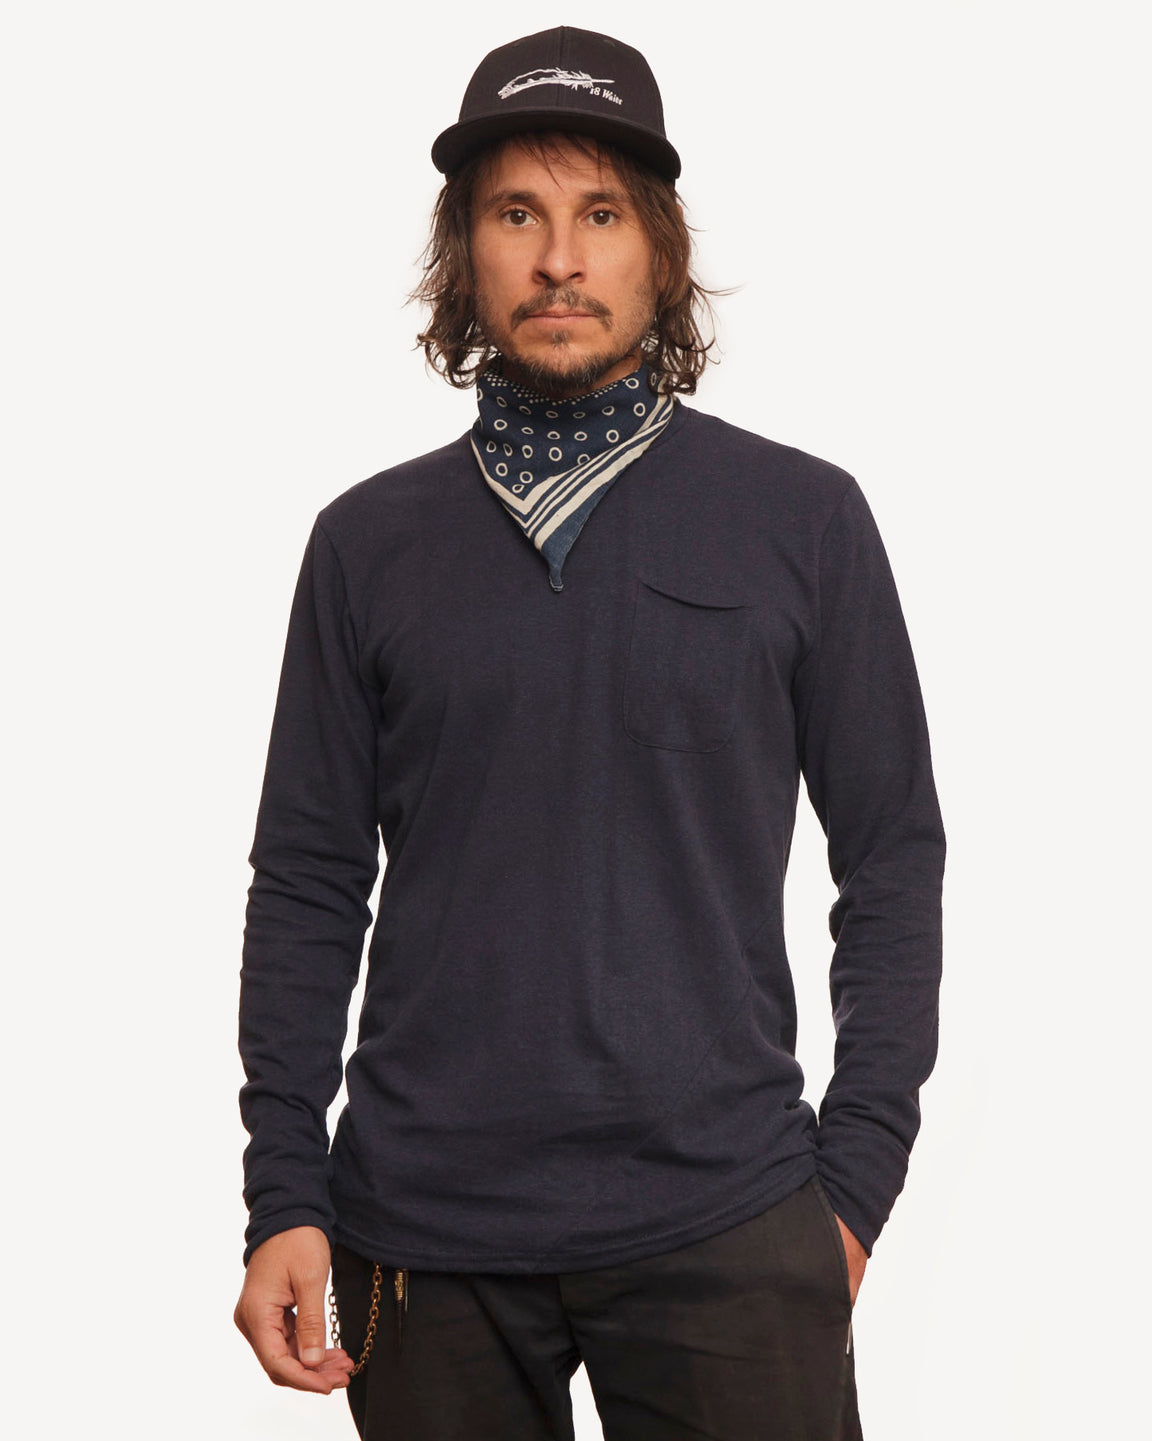 Mens Knits & T-Shirts Canada | Buy T-Shirts & Knits for Men Online